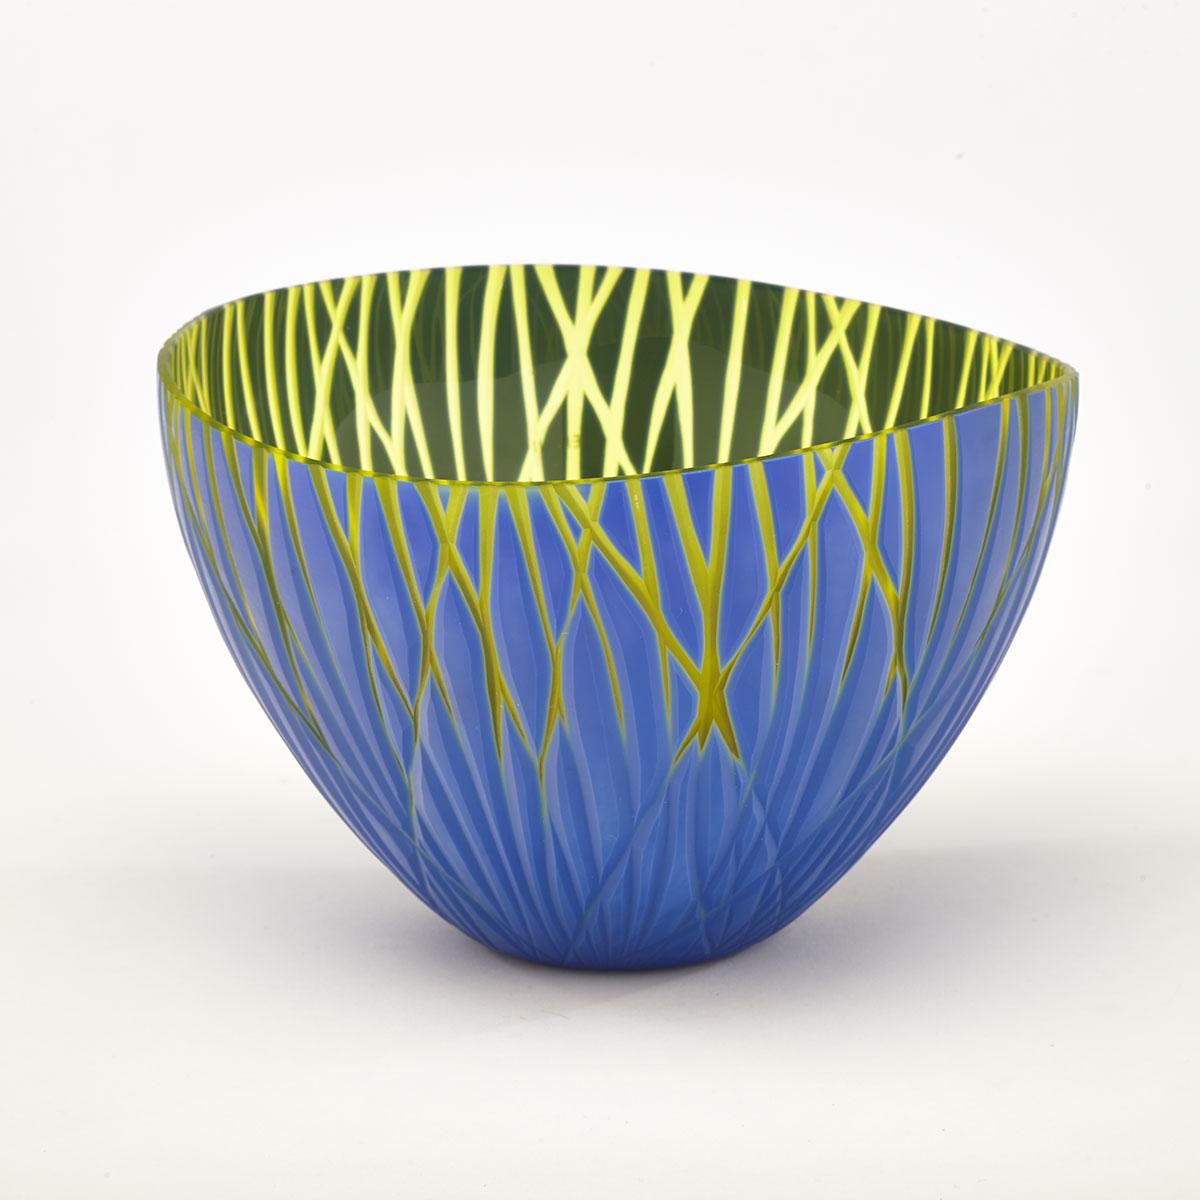 Venini Carved Opaque Blue and Yellow Glass Vase, 2004